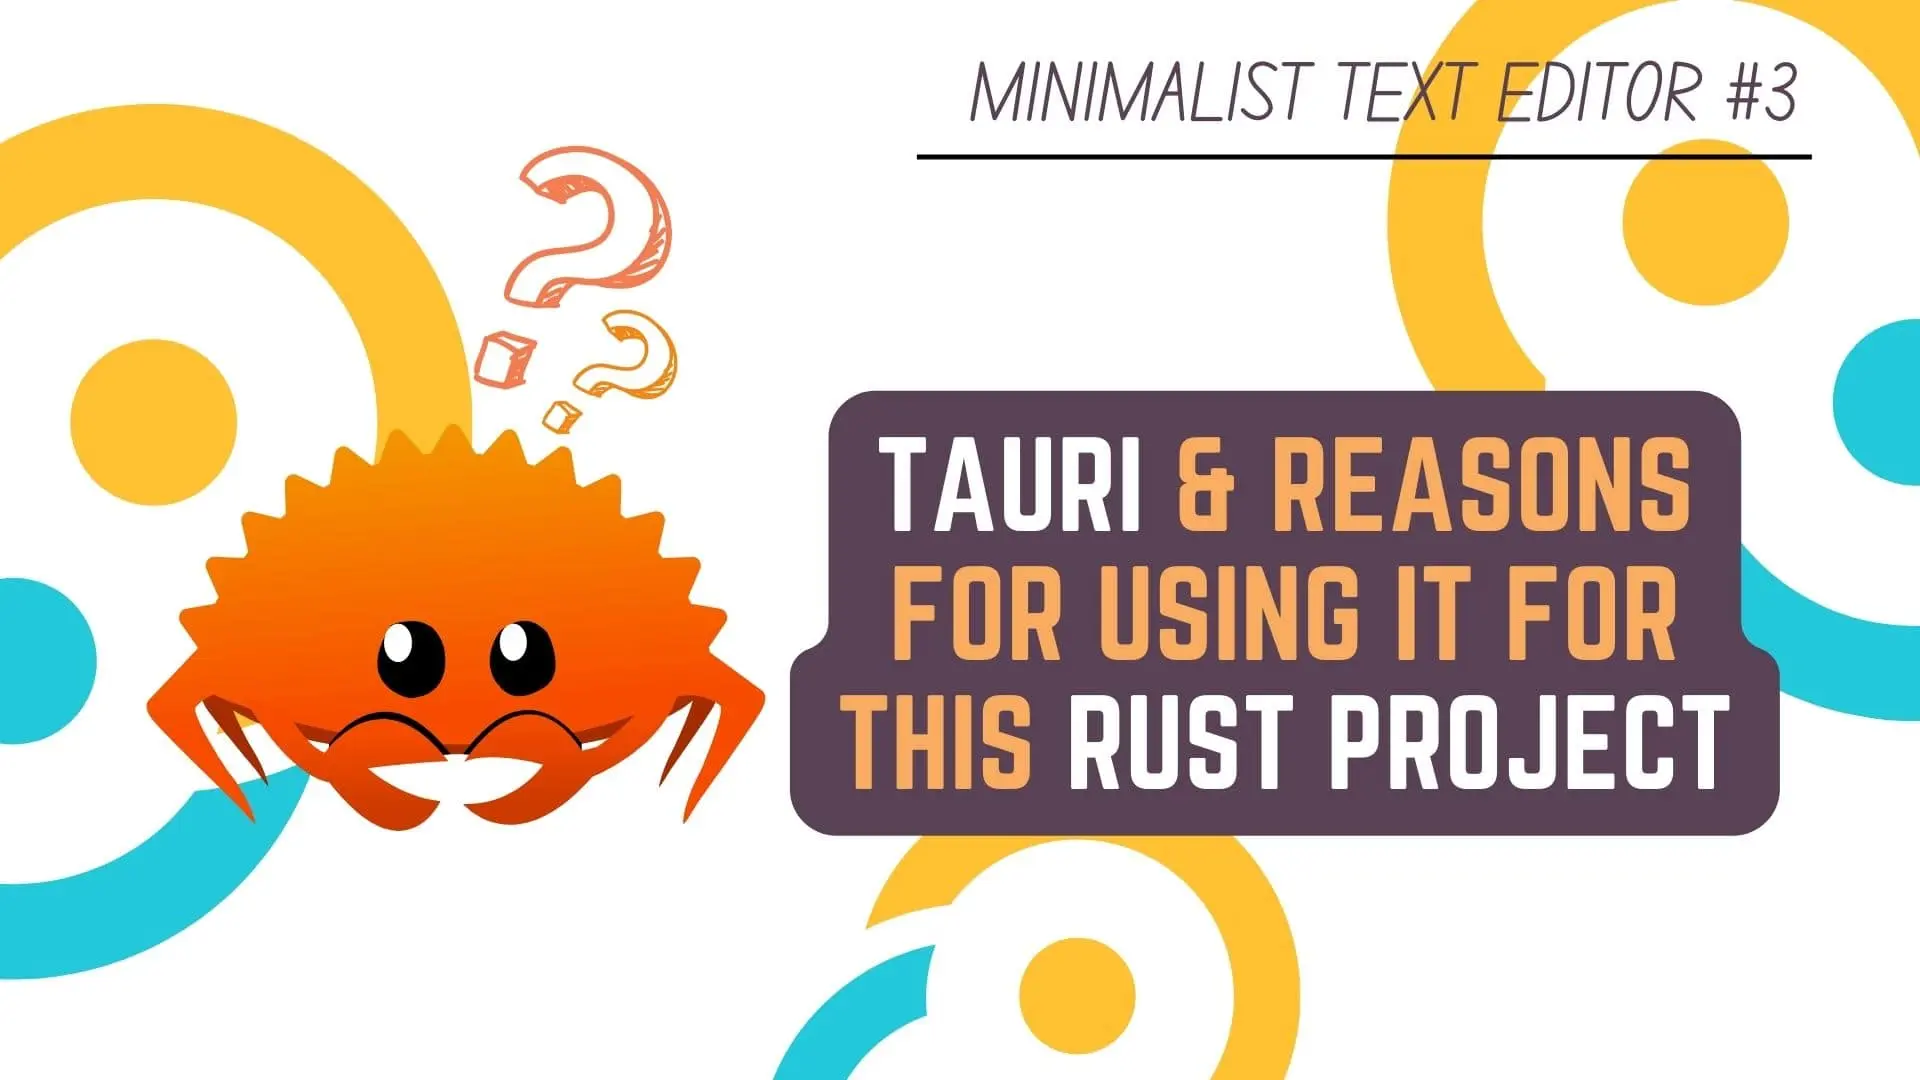 Minimalist Text Editor in Rust Programming Language & Tauri - #3 What is Tauri & Reasons for using it for our Rust Project - Rust & Tauri Tutorial